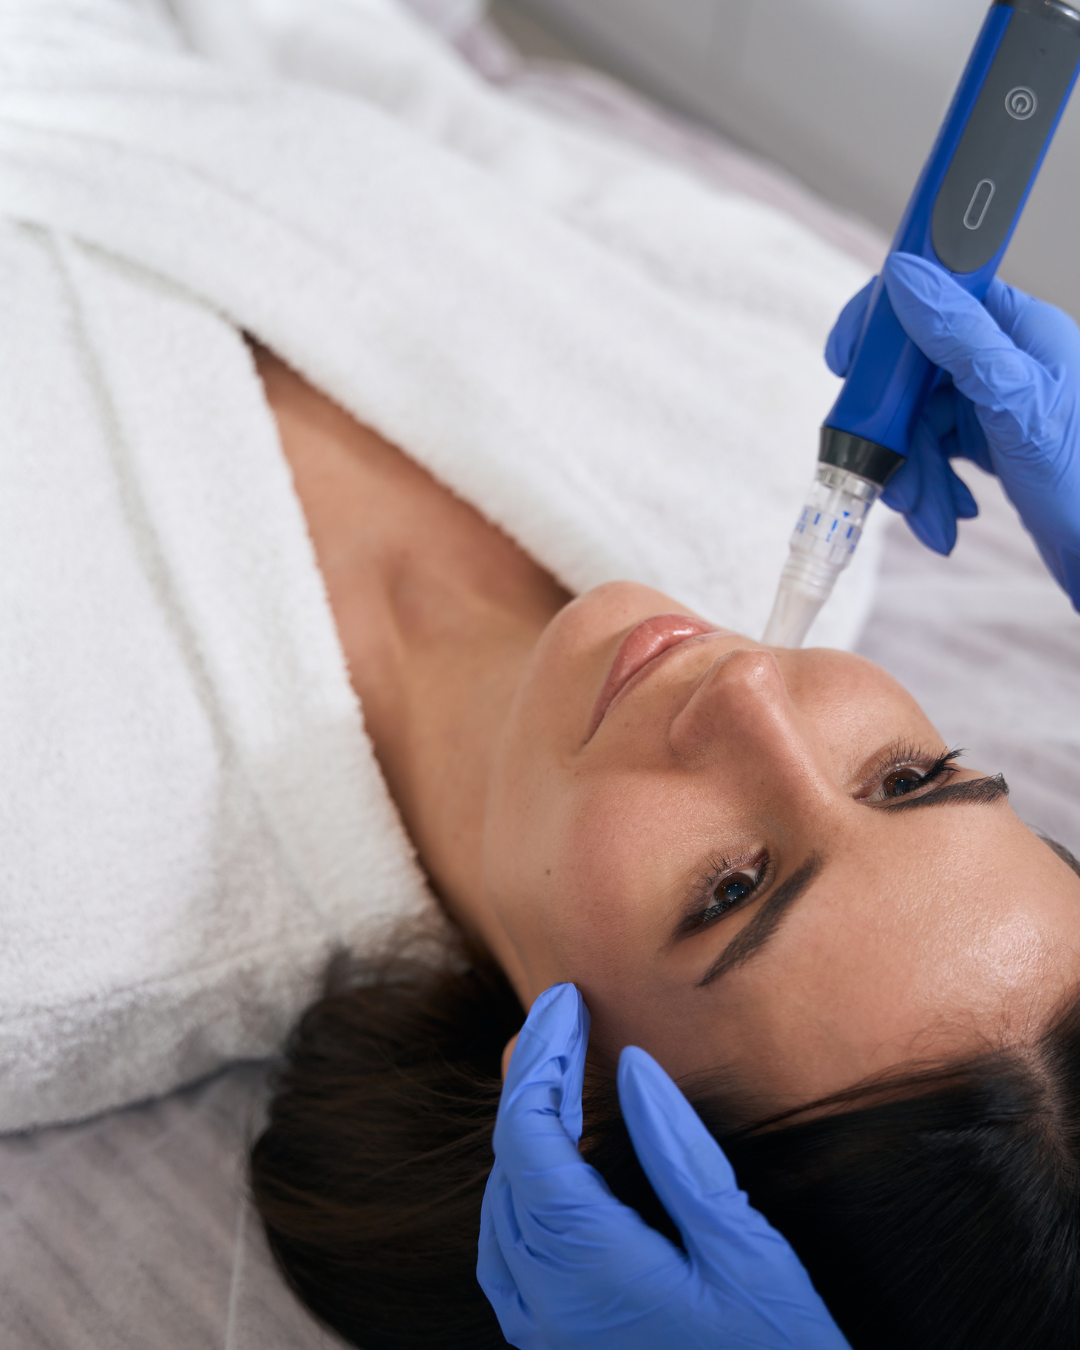 Can Microneedling Cause Acne?